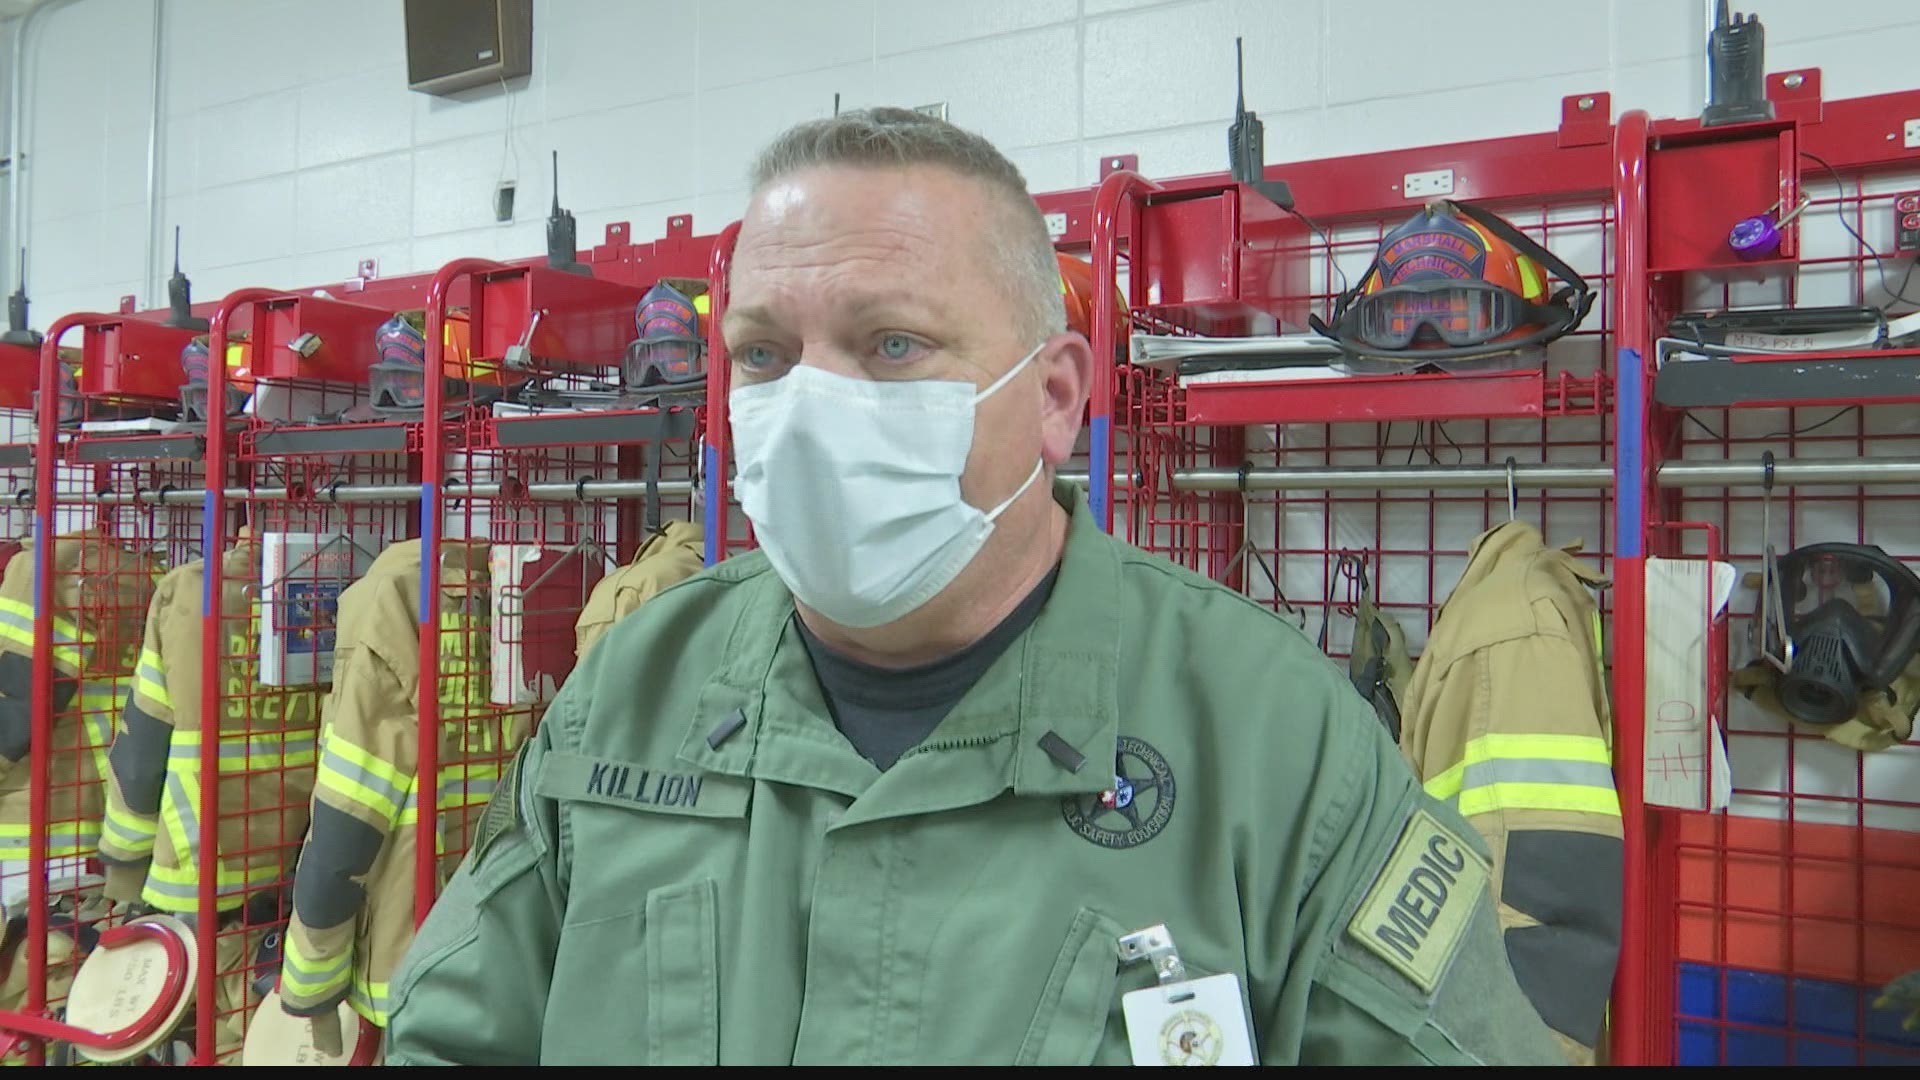 Lieutenant Killion has been teaching kids at Marshall Technical School for the past nine years, but has been serving as a first responder for over 30 years.